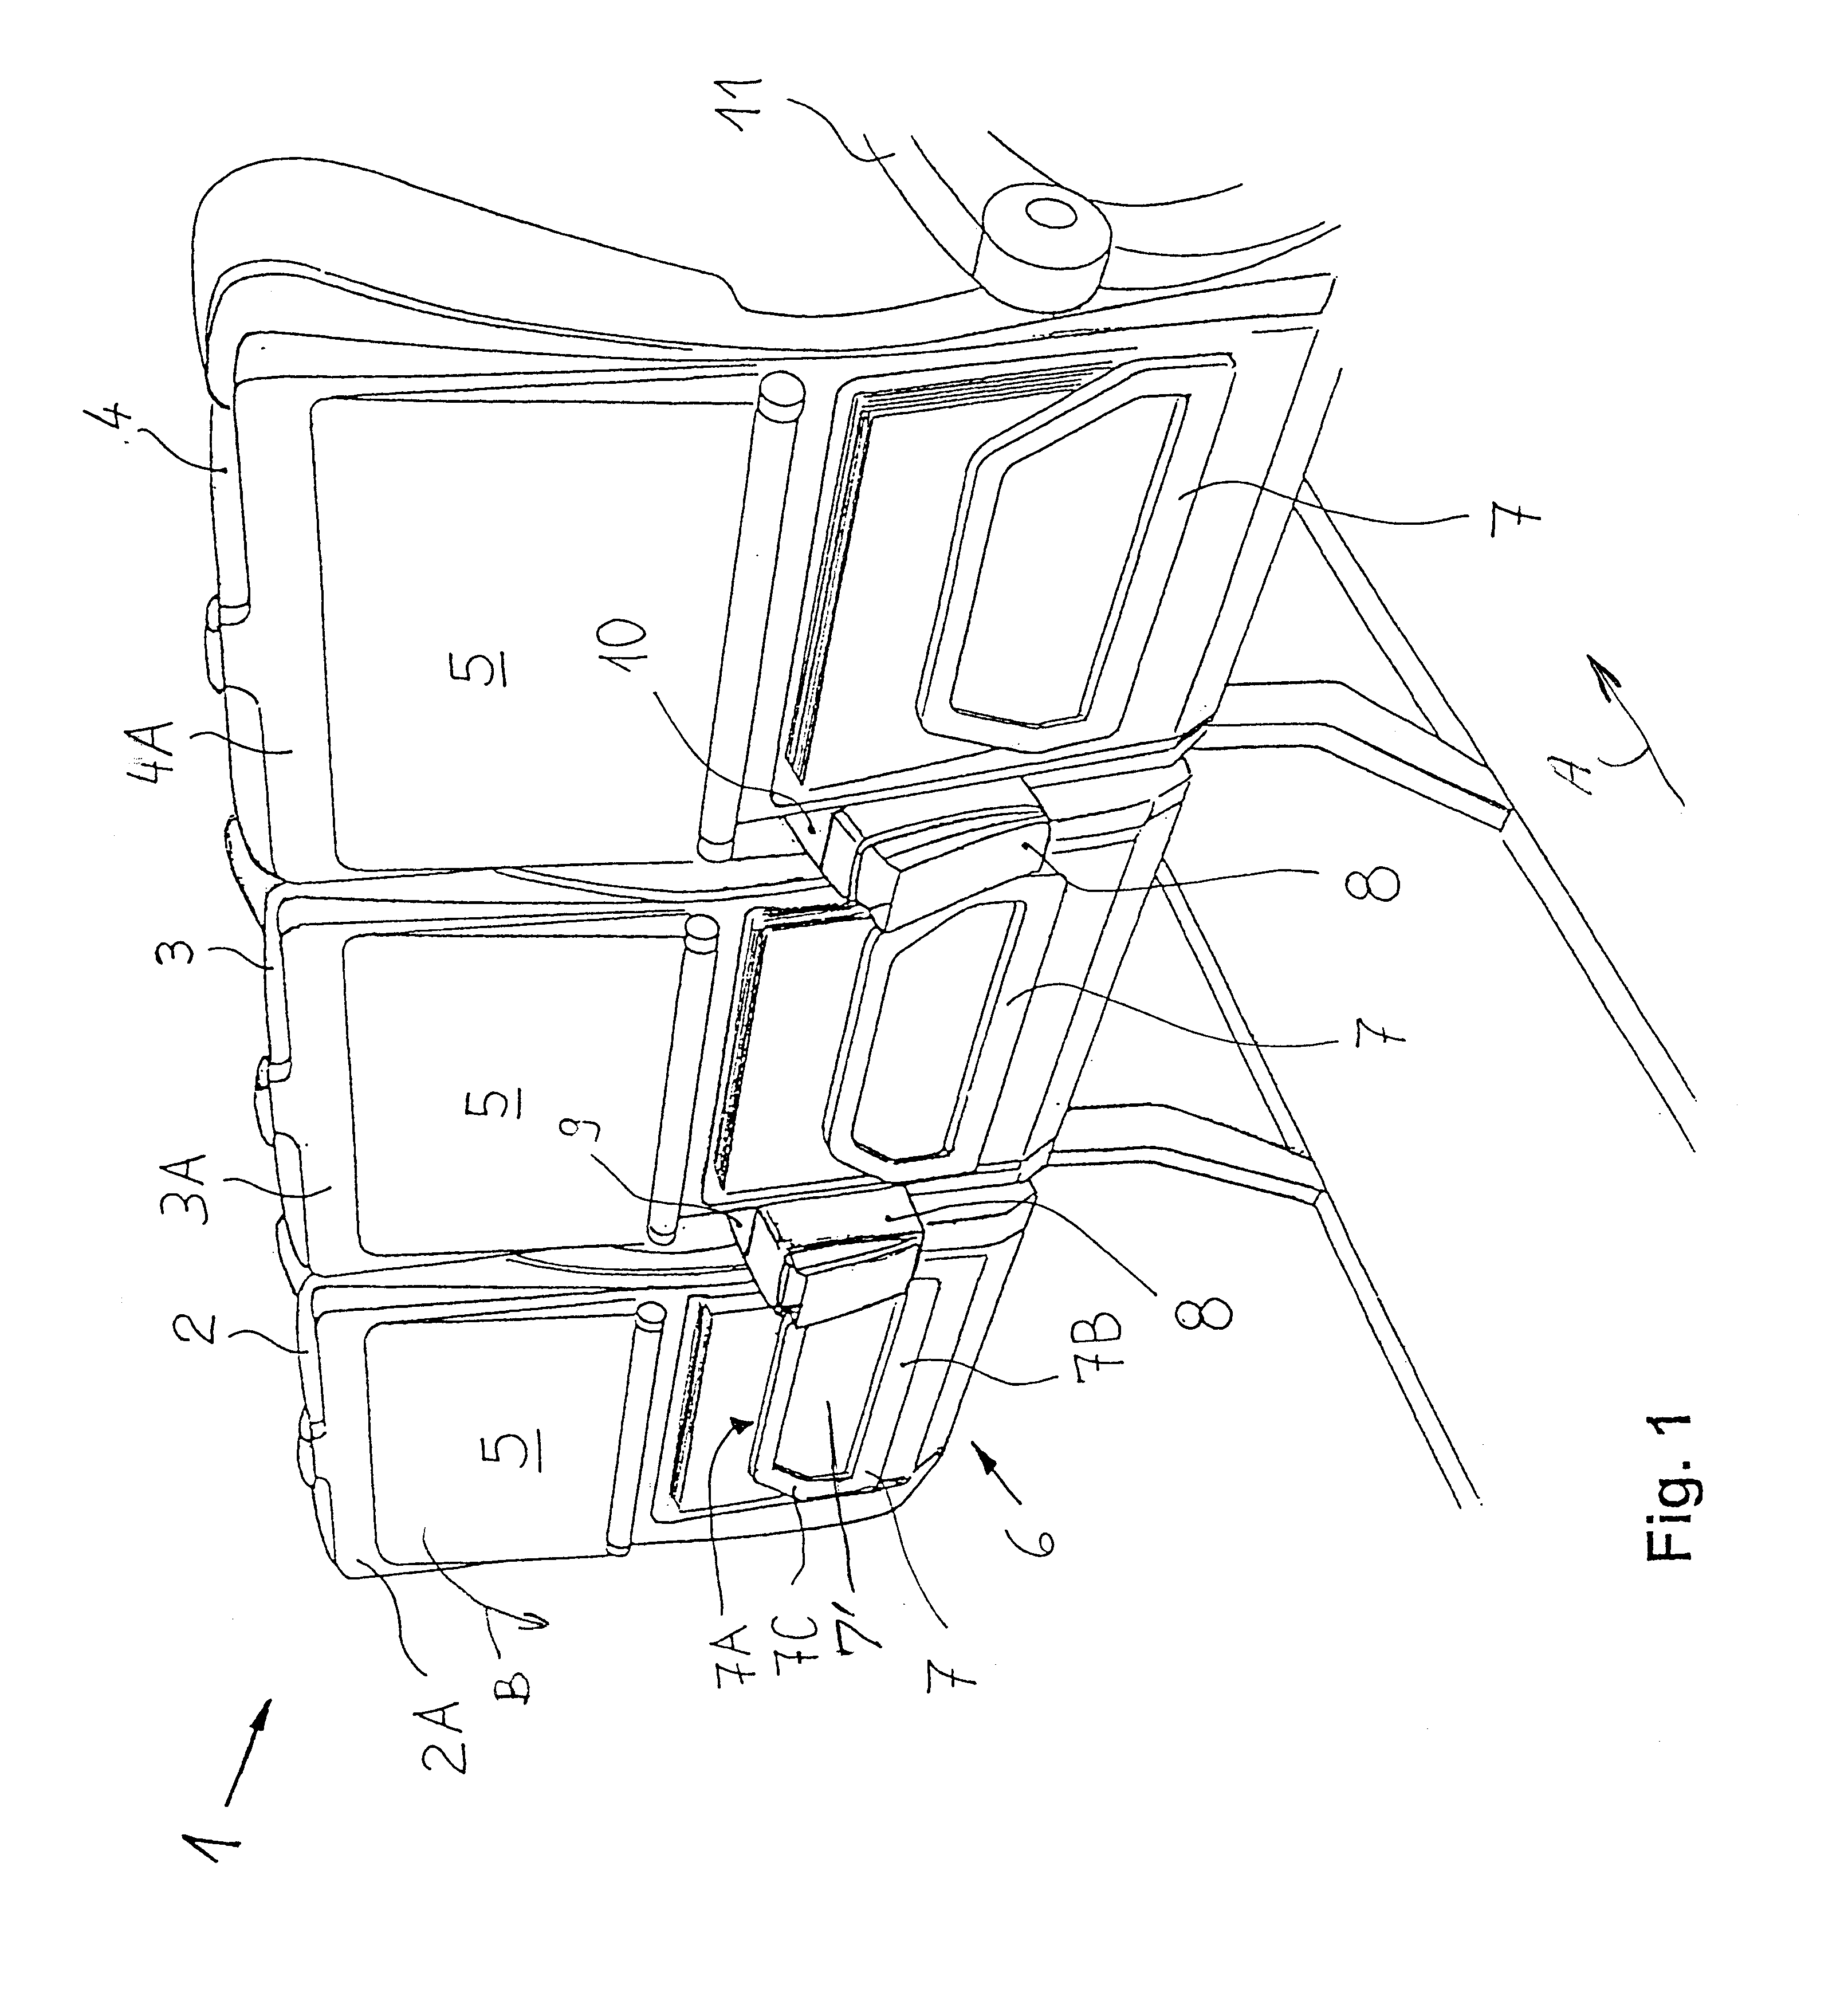 Passenger chair with a convenience device